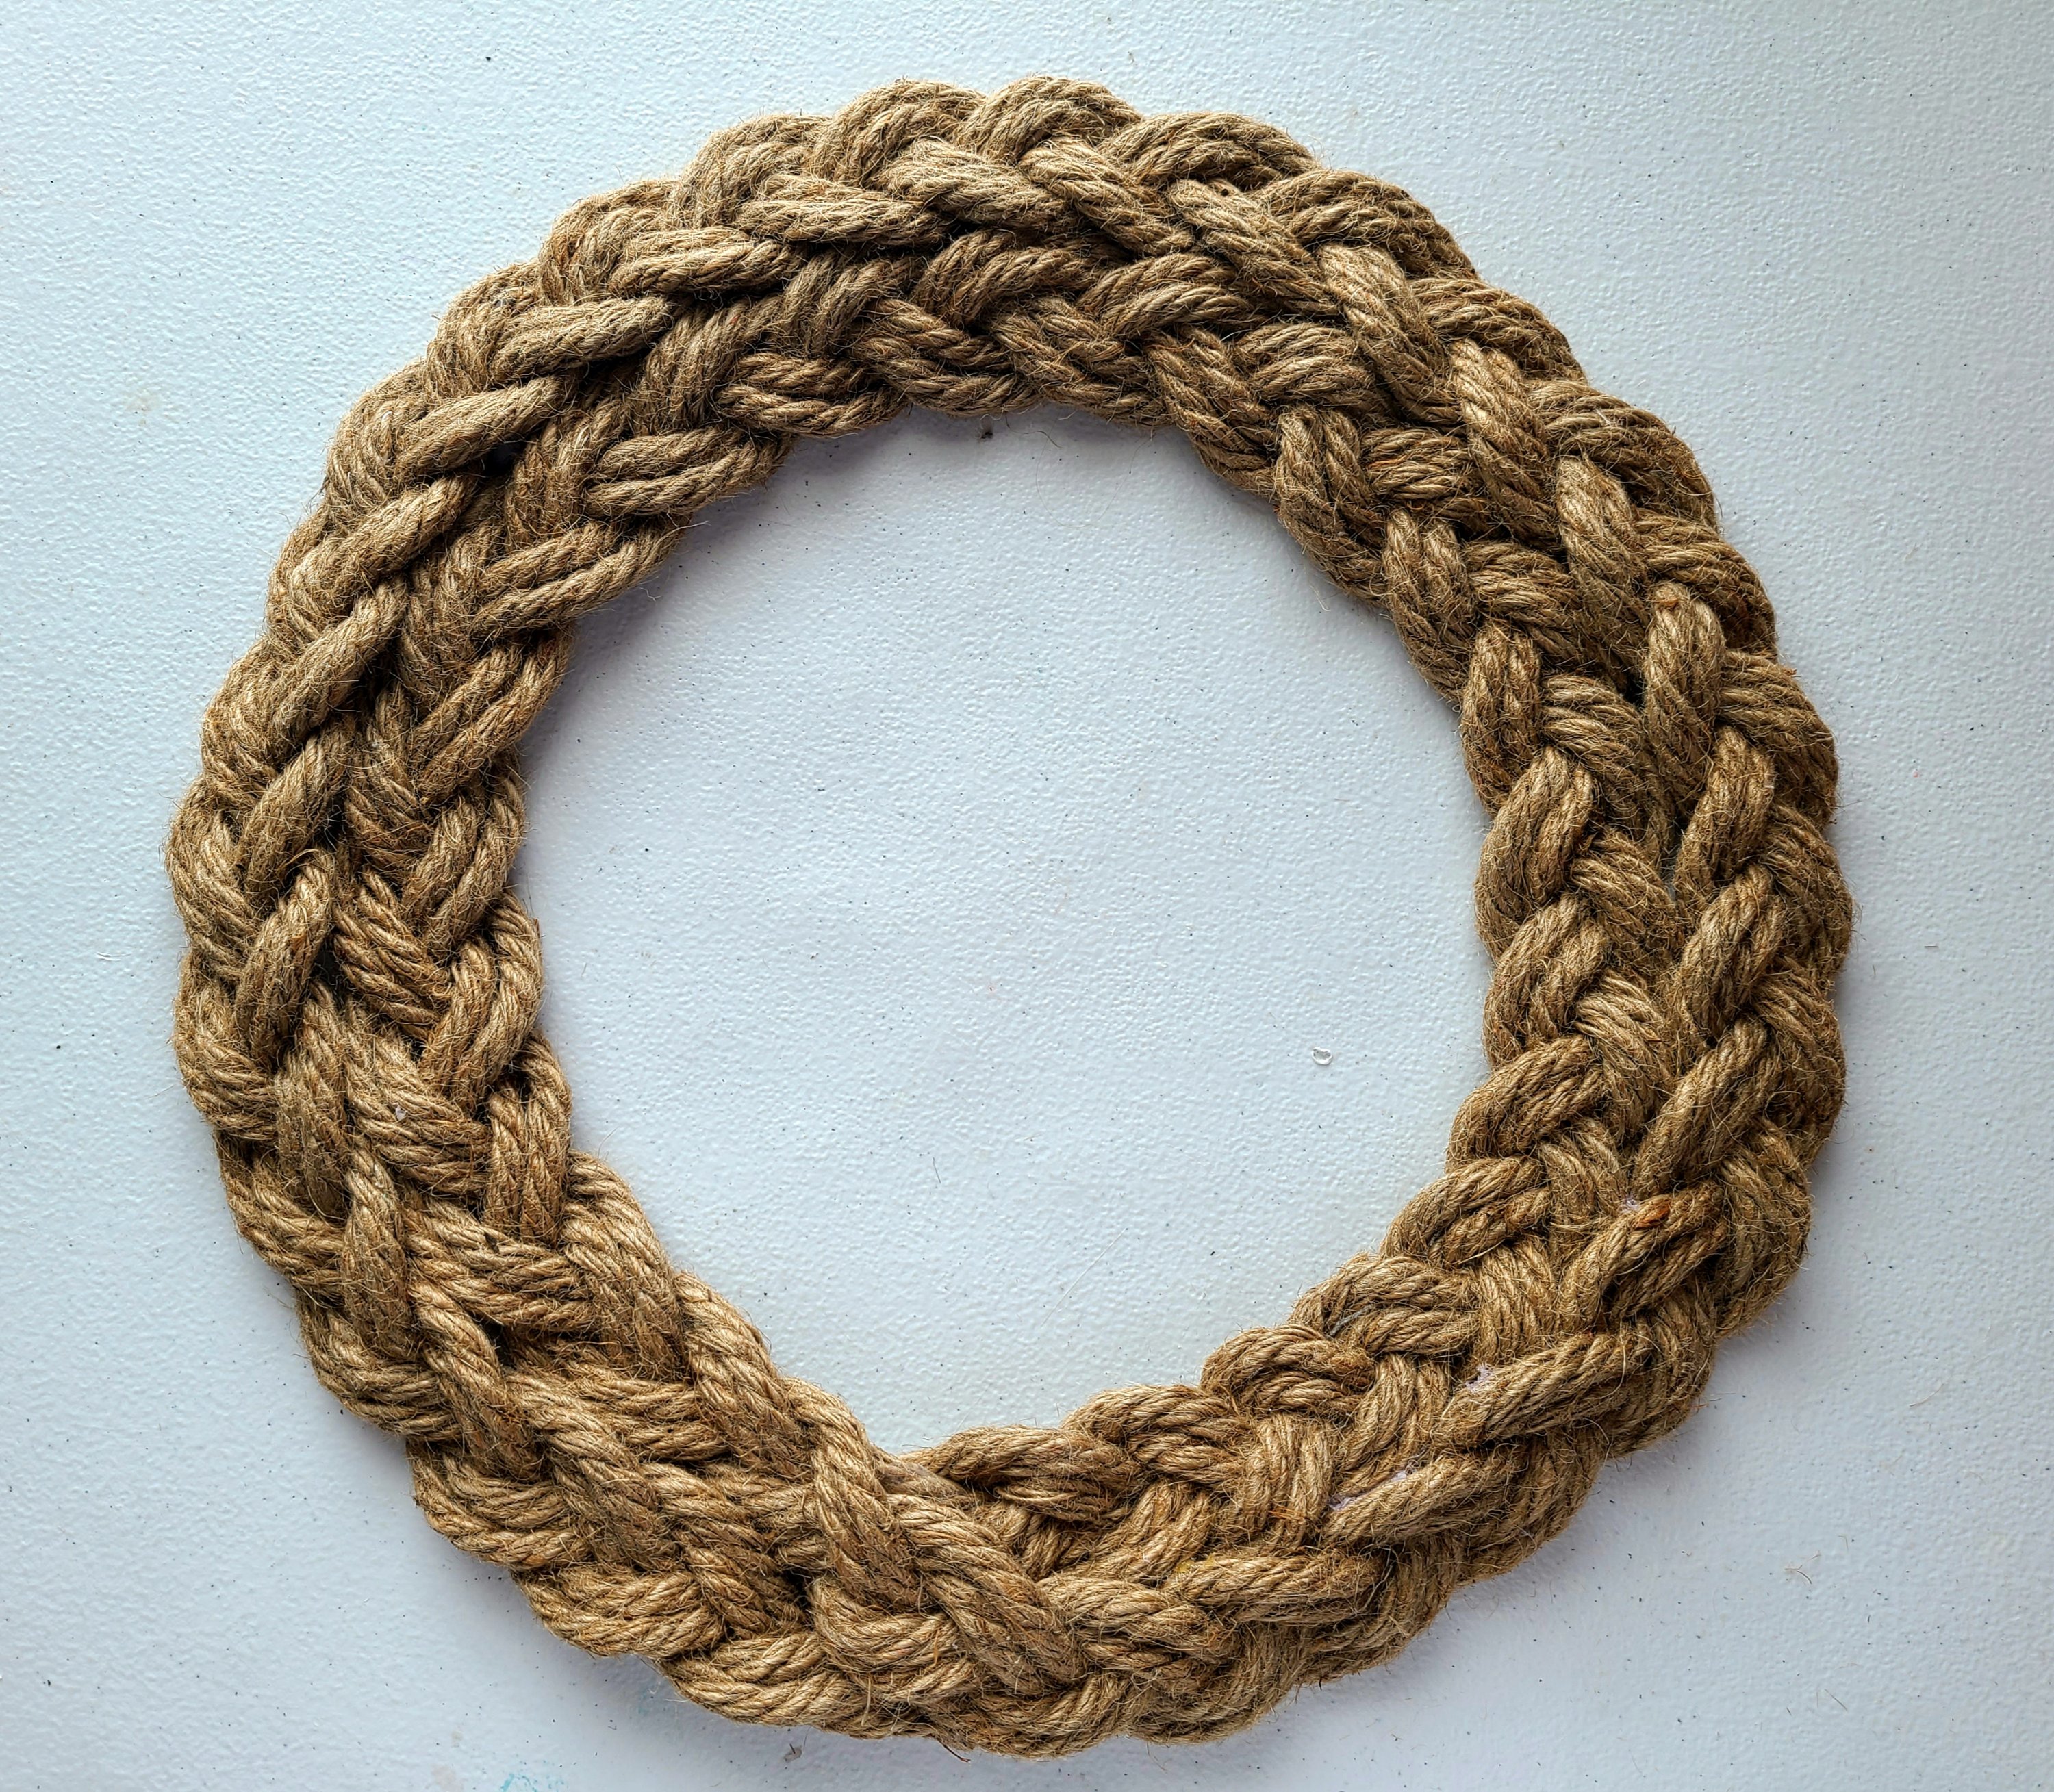 Braided rope completely attached to the wreath form.